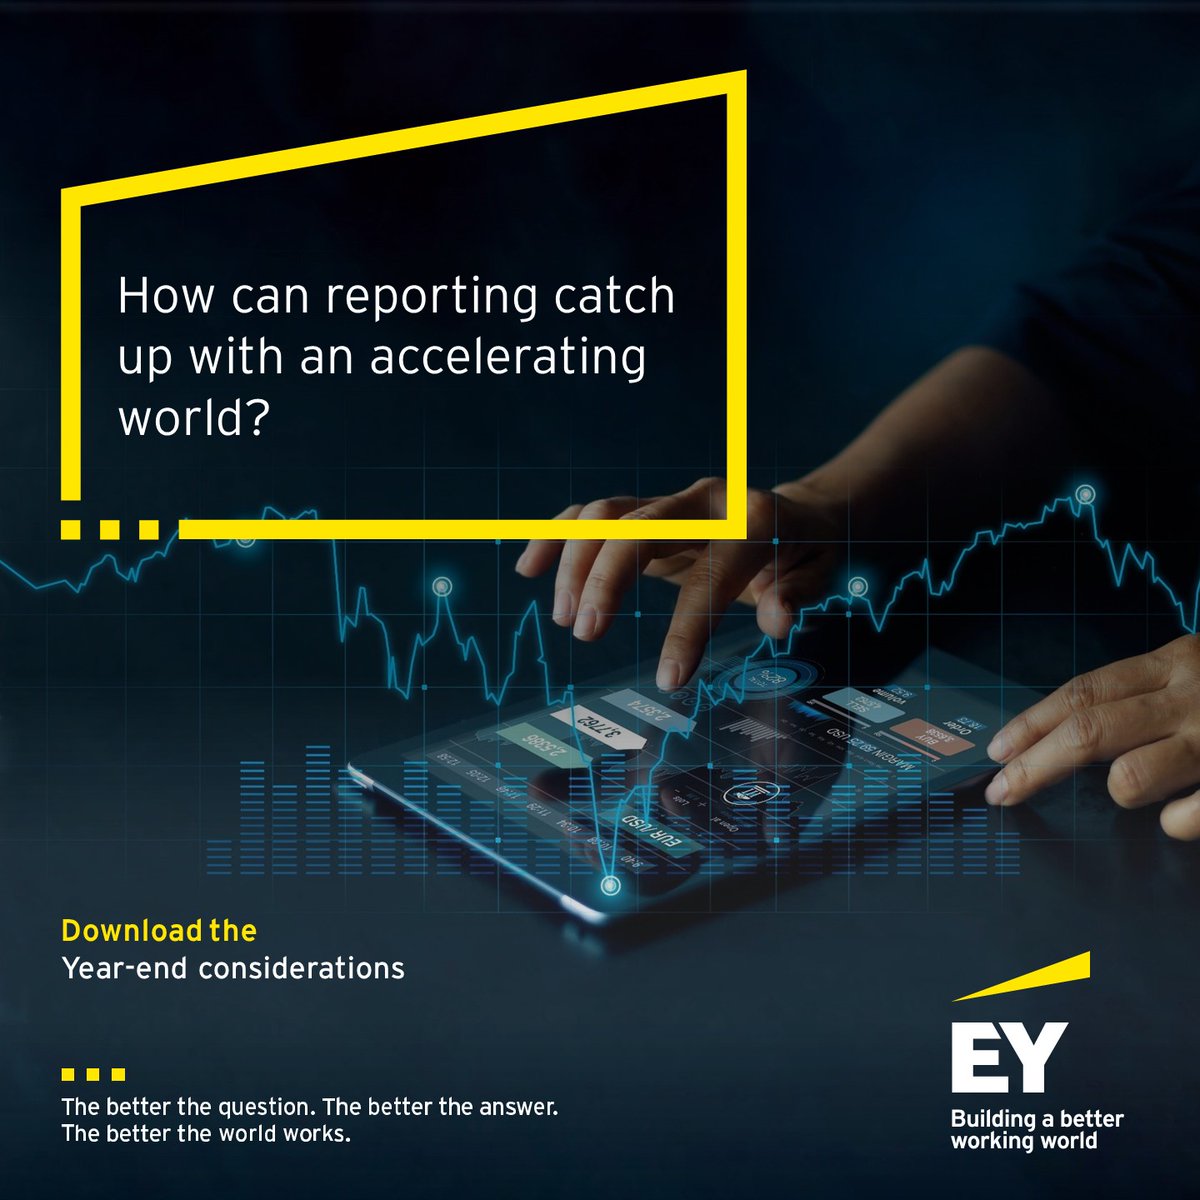 Download the  EY publication, Year-end considerations aims to help companies make sense of the accounting and regulatory landscape that is relevant for FY 2023-24 and beyond.
go.ey.com/49TTqC3

#BetterWorkingWorld #FinancialReporting